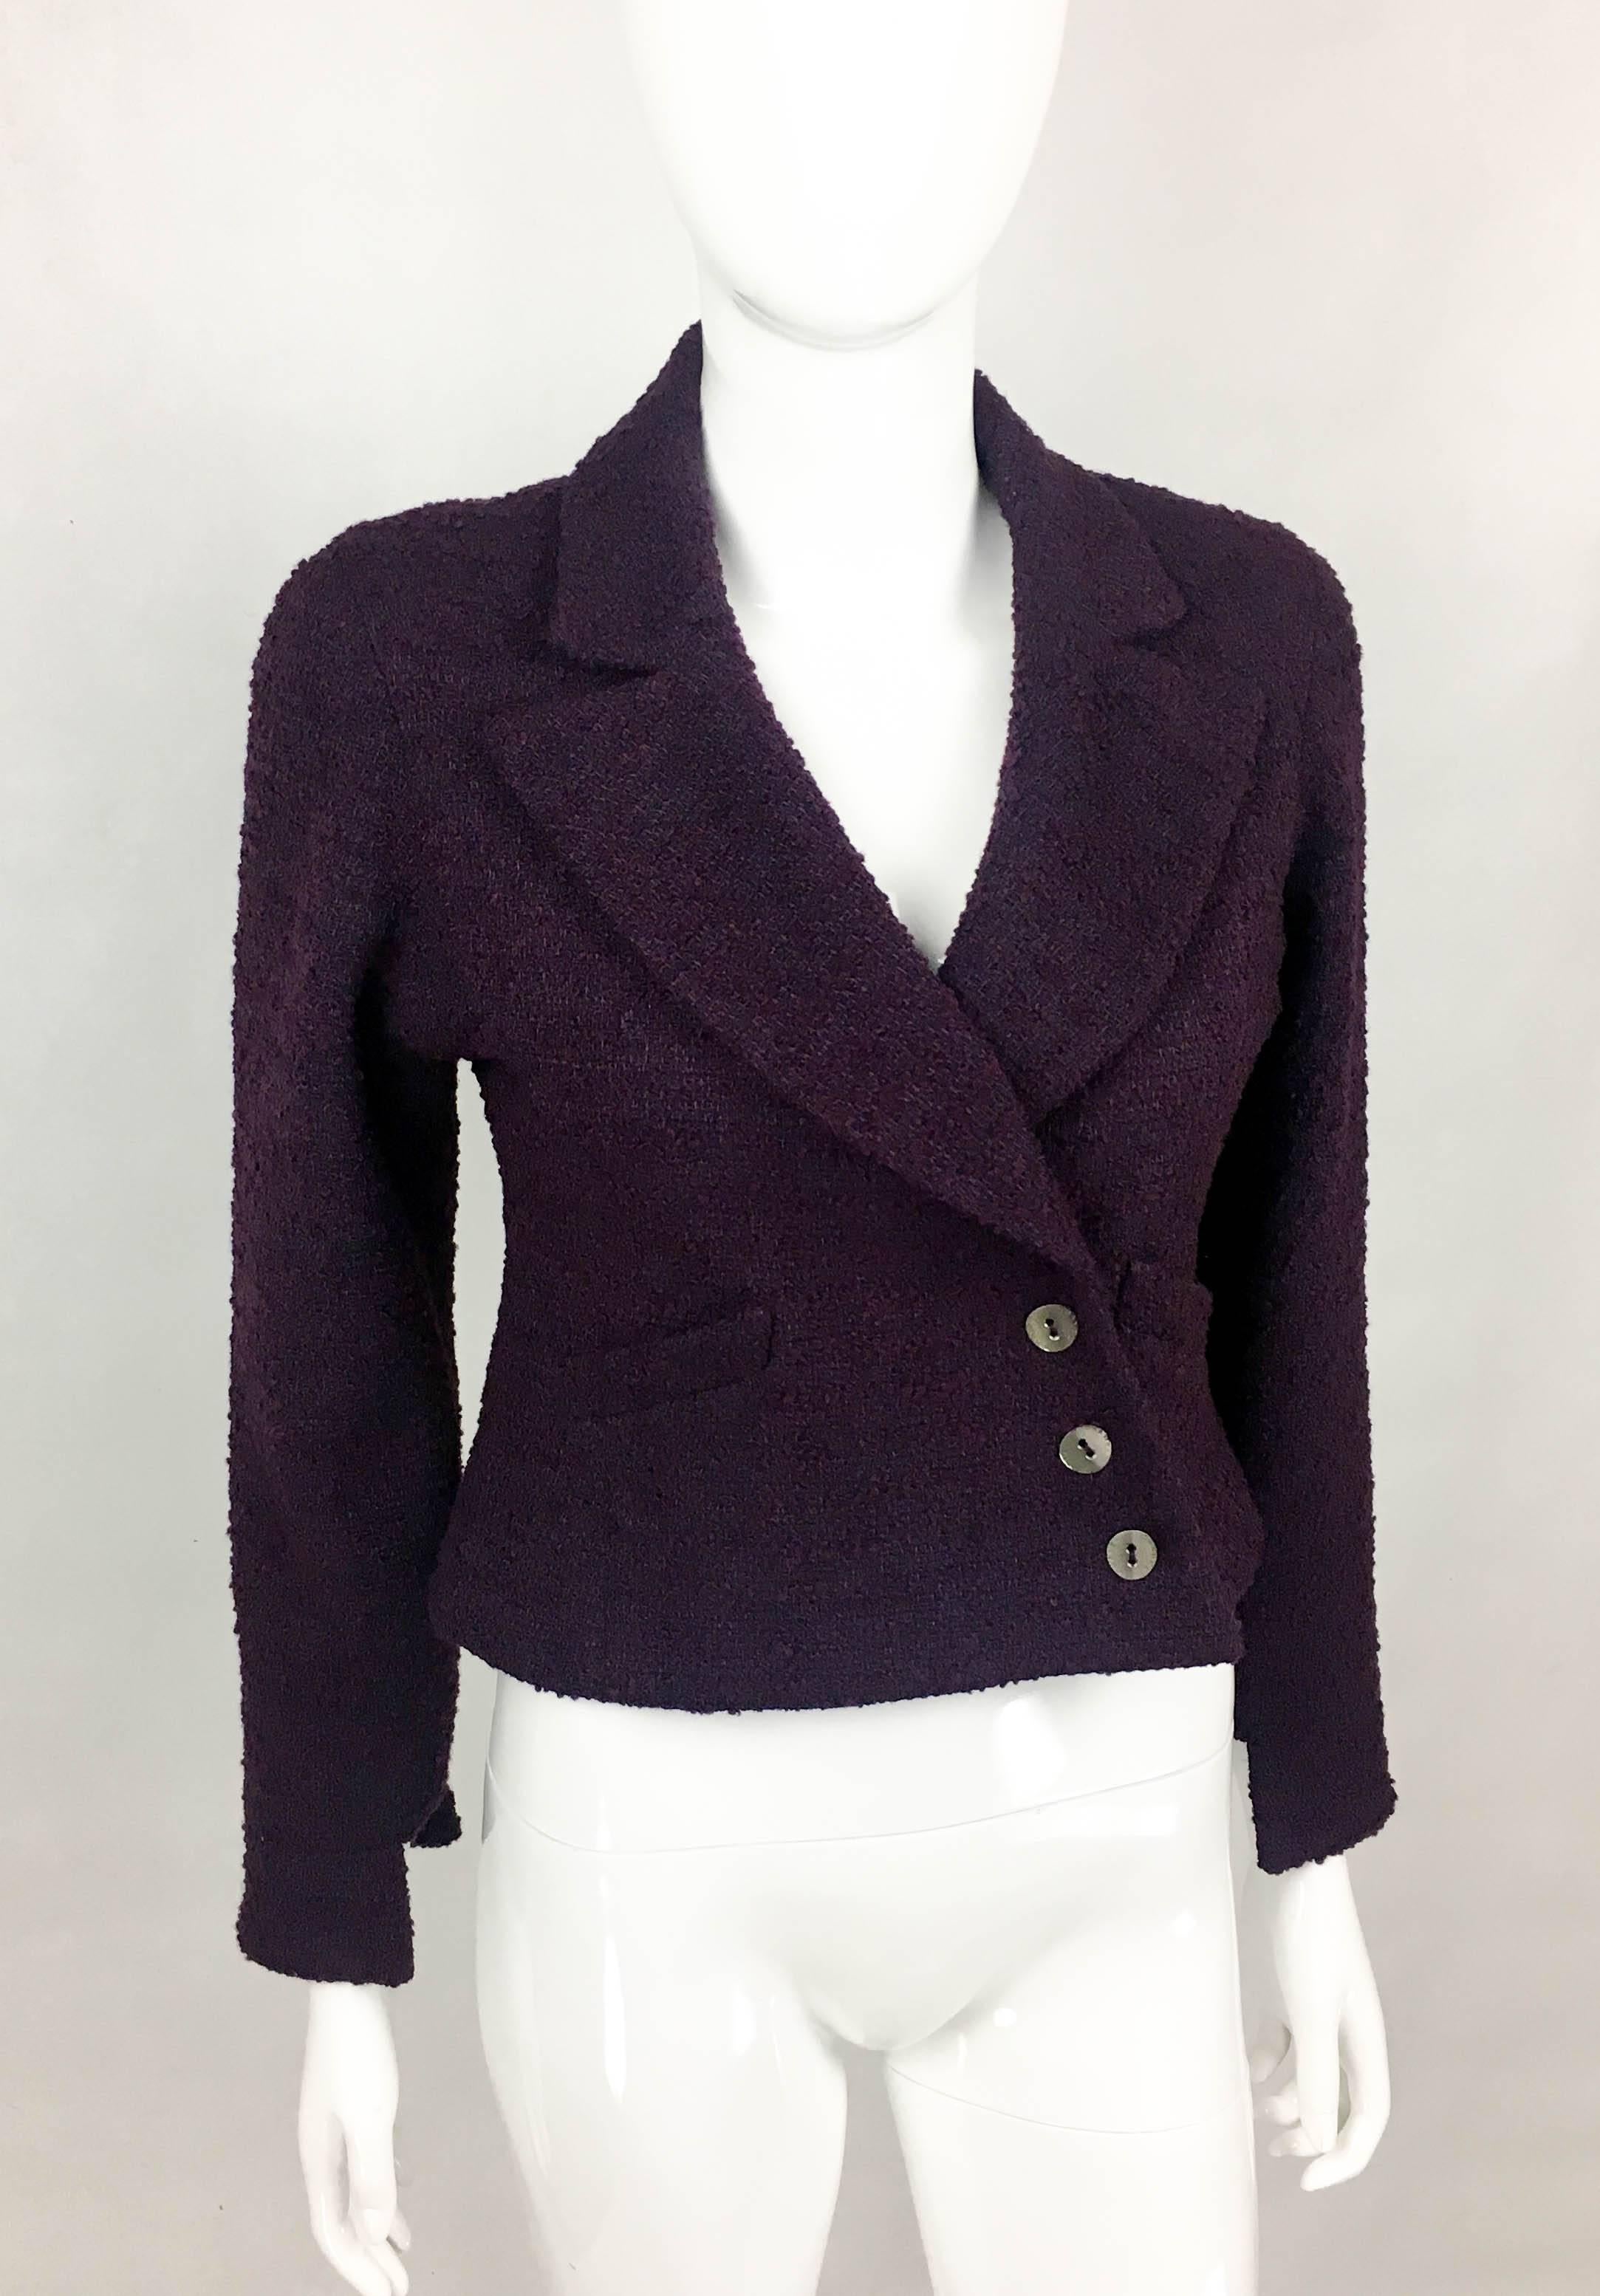 2001 Chanel Deep Purple Bouclé Cropped Jacket In Excellent Condition For Sale In London, Chelsea